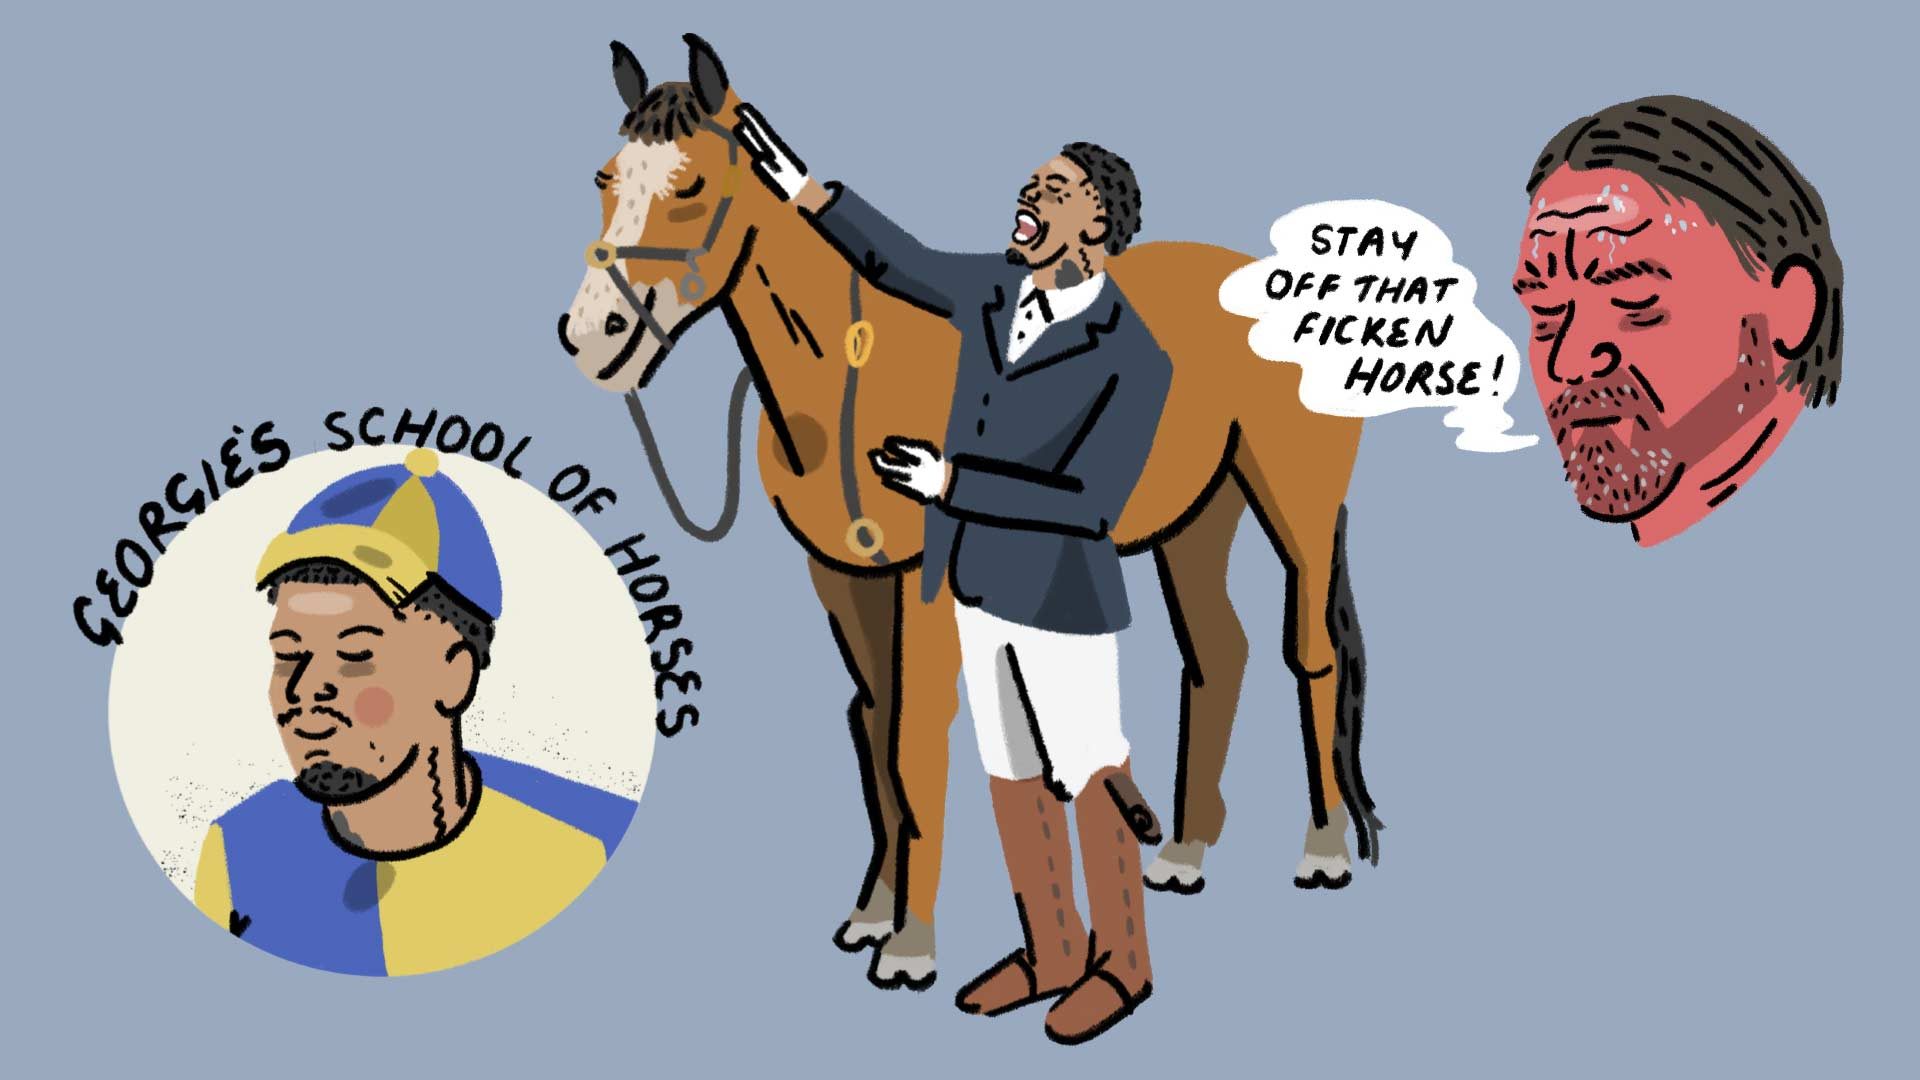 An illustration of Georgi Rutter with his horse and an angry Daniel Farke yelling out of a speech bubble: "STAY OFF THAT FICKEN HORSE!"